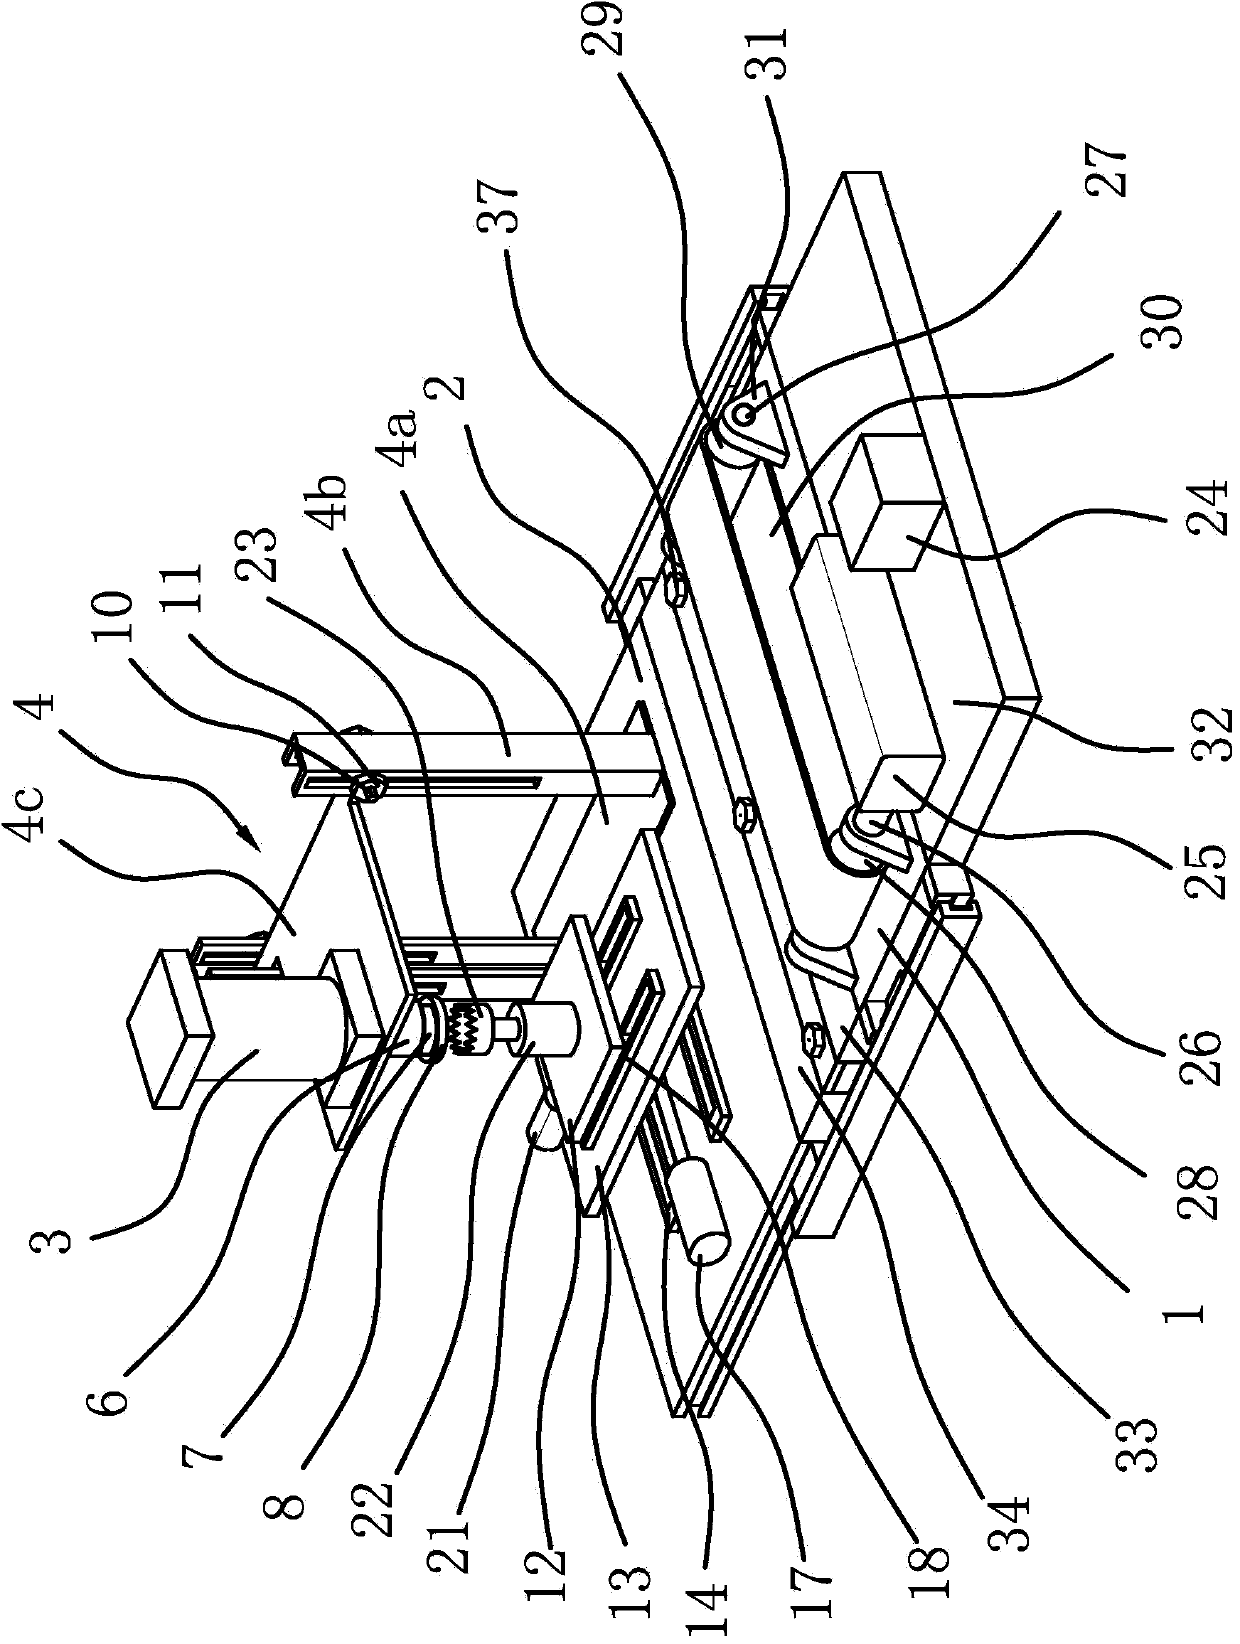 Production frame used for processing clutch release bearing of automobile